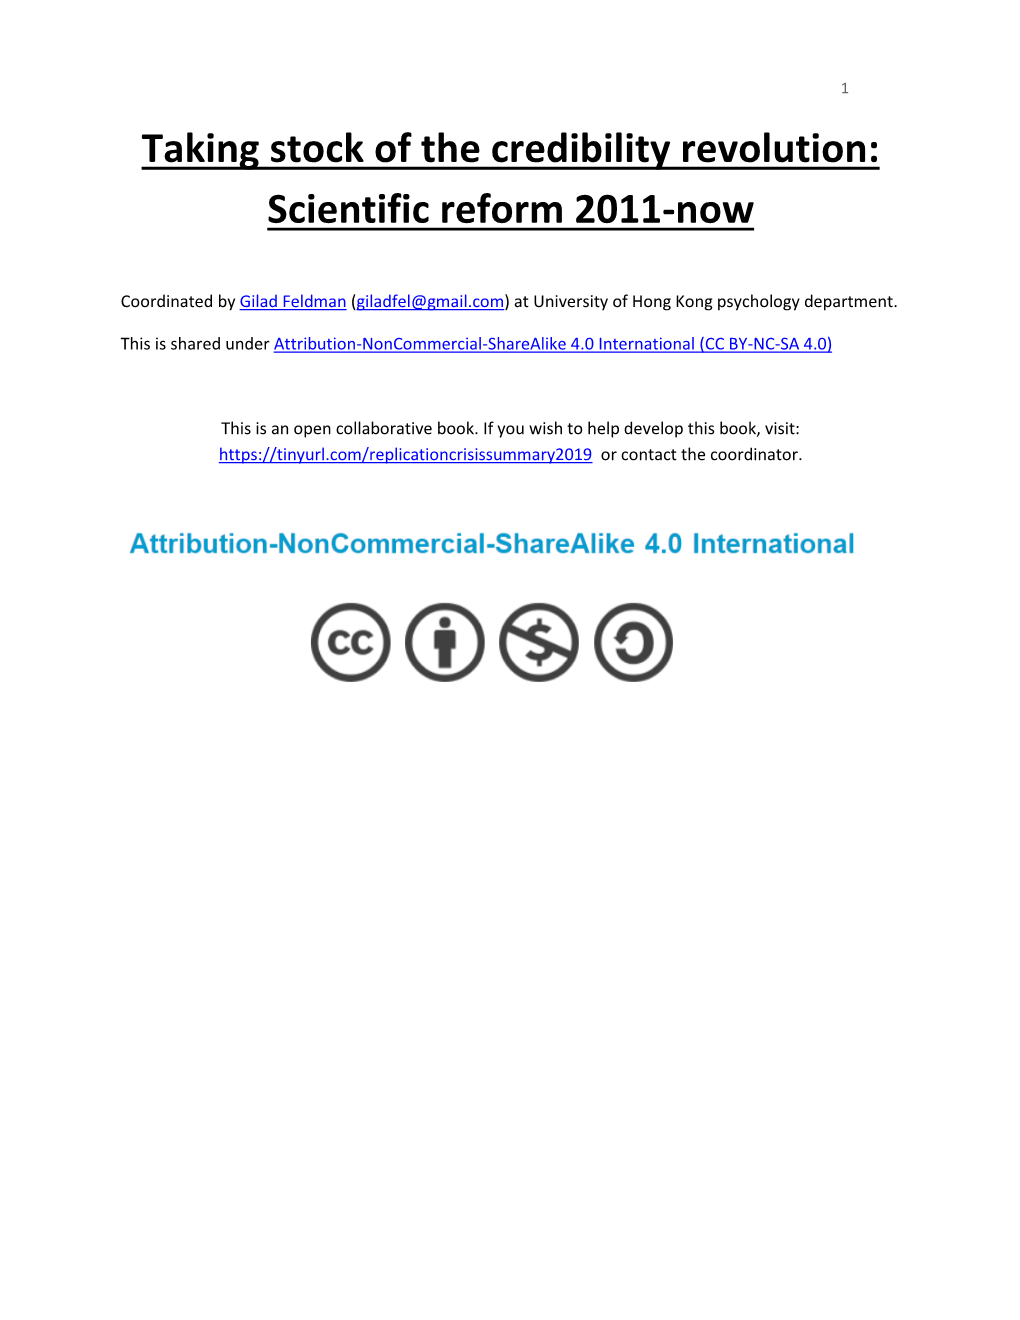 Taking Stock of the Credibility Revolution: Scientific Reform 2011-Now